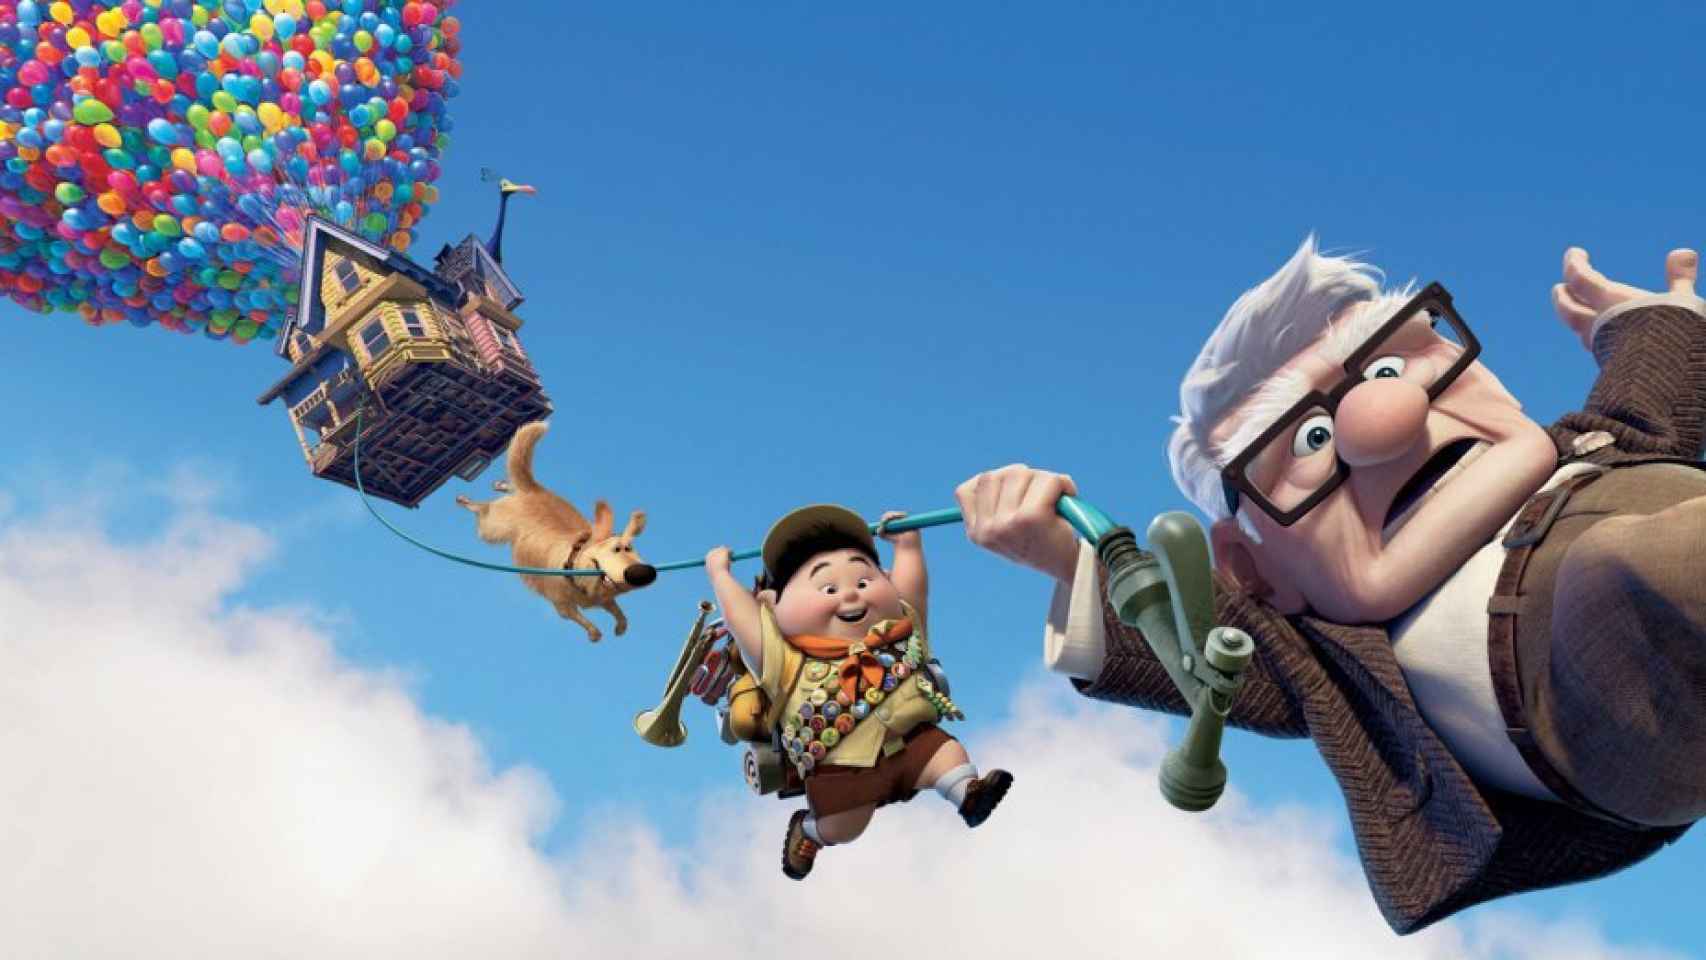 'Up'.